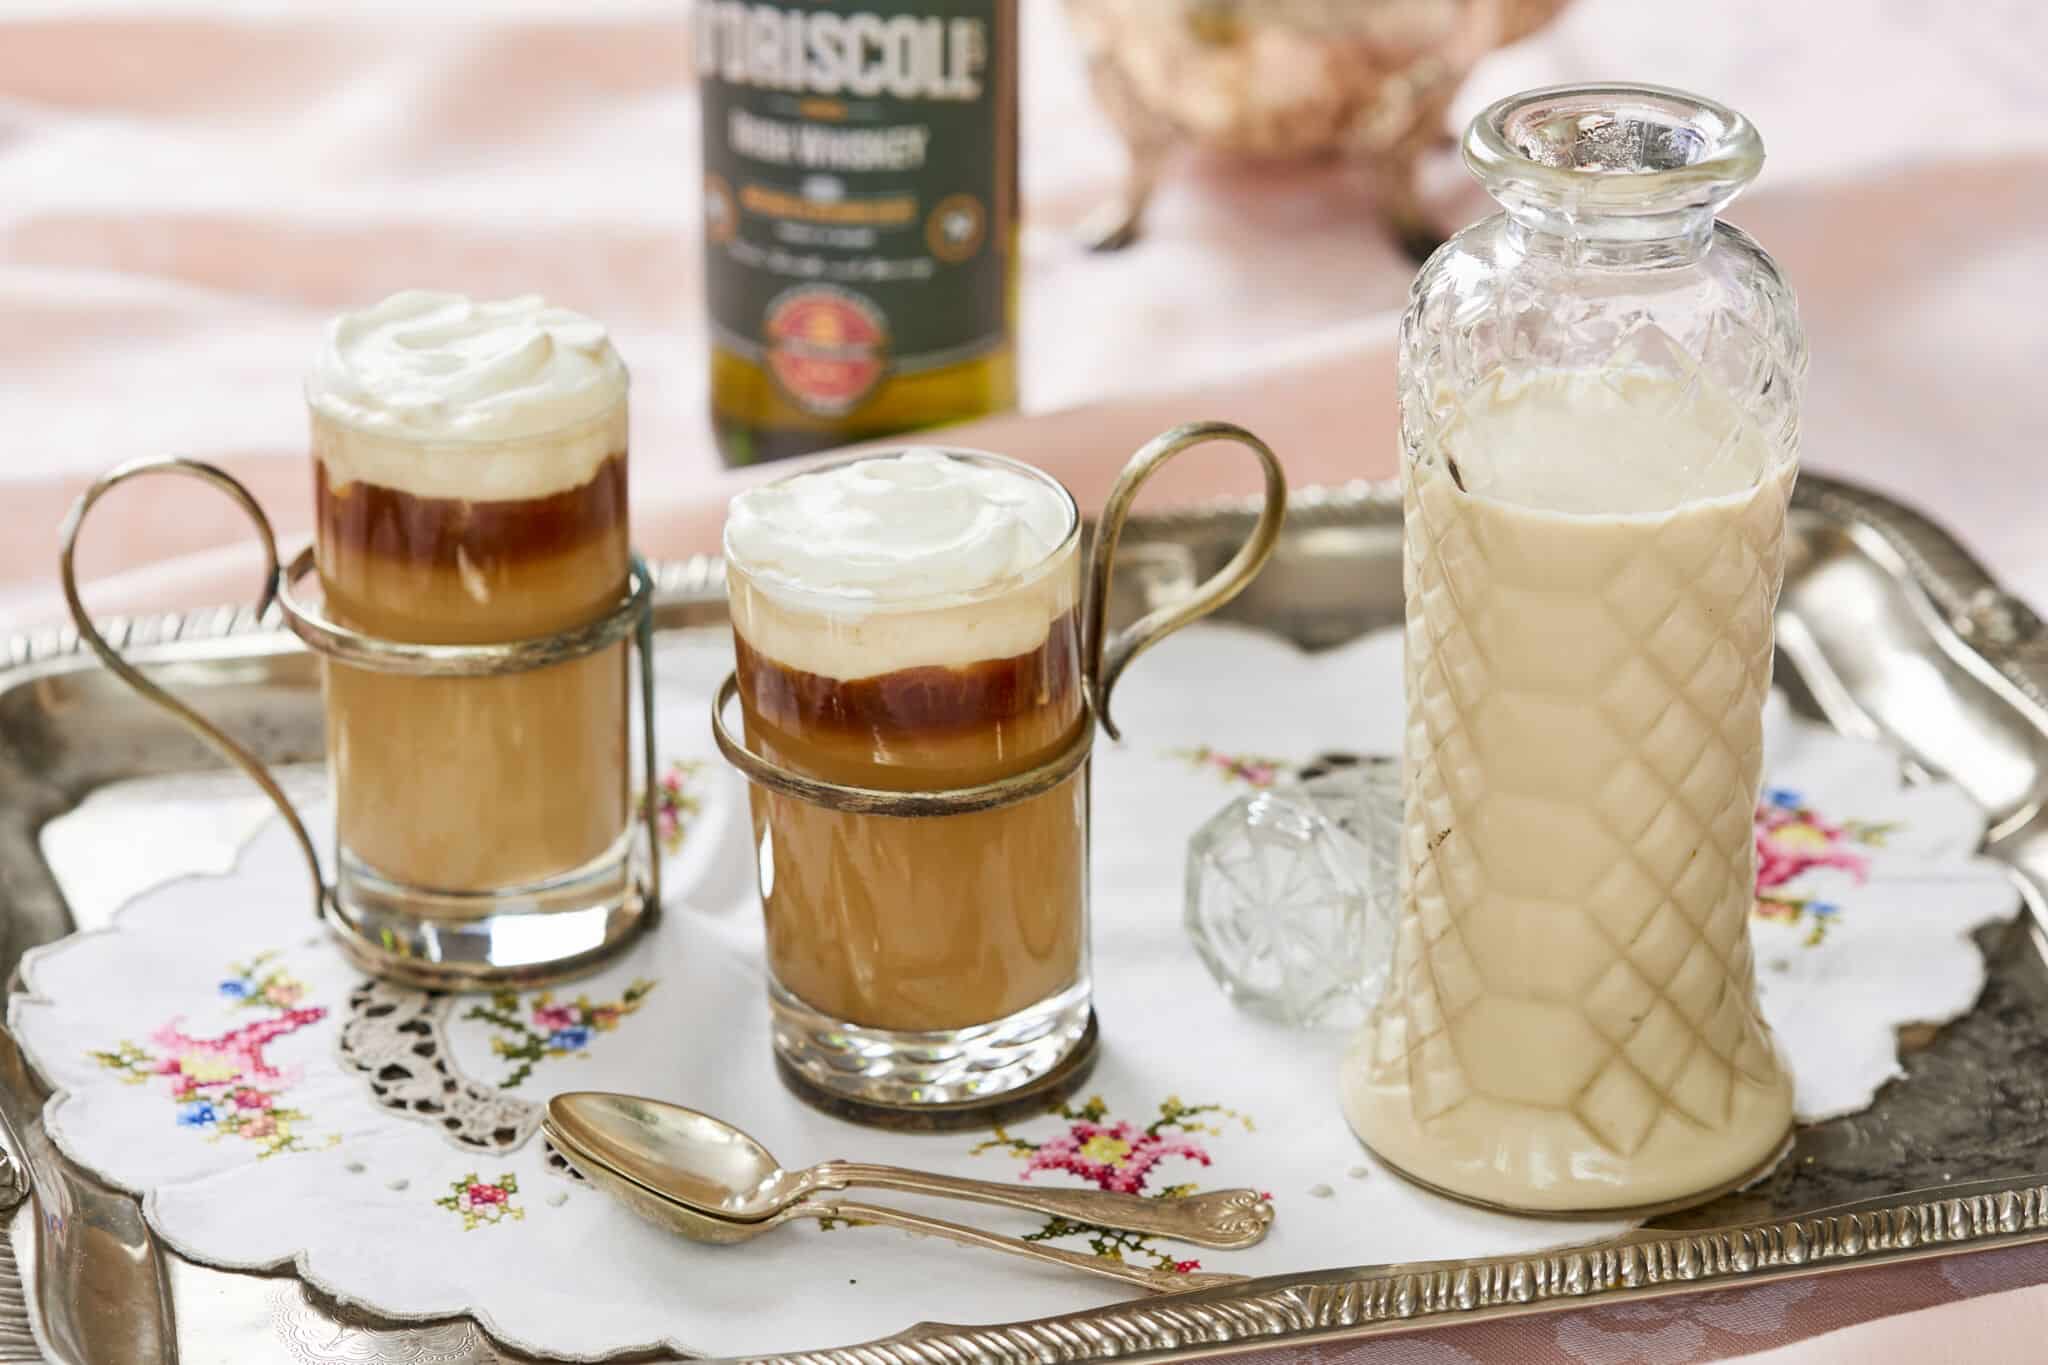 Silky smooth Homemade Irish Cream is in stored in a tall weave pattern glass bottle on the right side on a silver platter. To the left of the bottle are two glasses of Irish Cream Frappuccino which has blended sweet, floral, nutty and boozy Irish Cream with coffee and milk at the bottom, topped with pillowy whipped cream. A silver spoon is also on the platter next to the glasses. A bottle of O'Driscoll's whiskey and a tea pot are next to the platter in the upper center of the image.